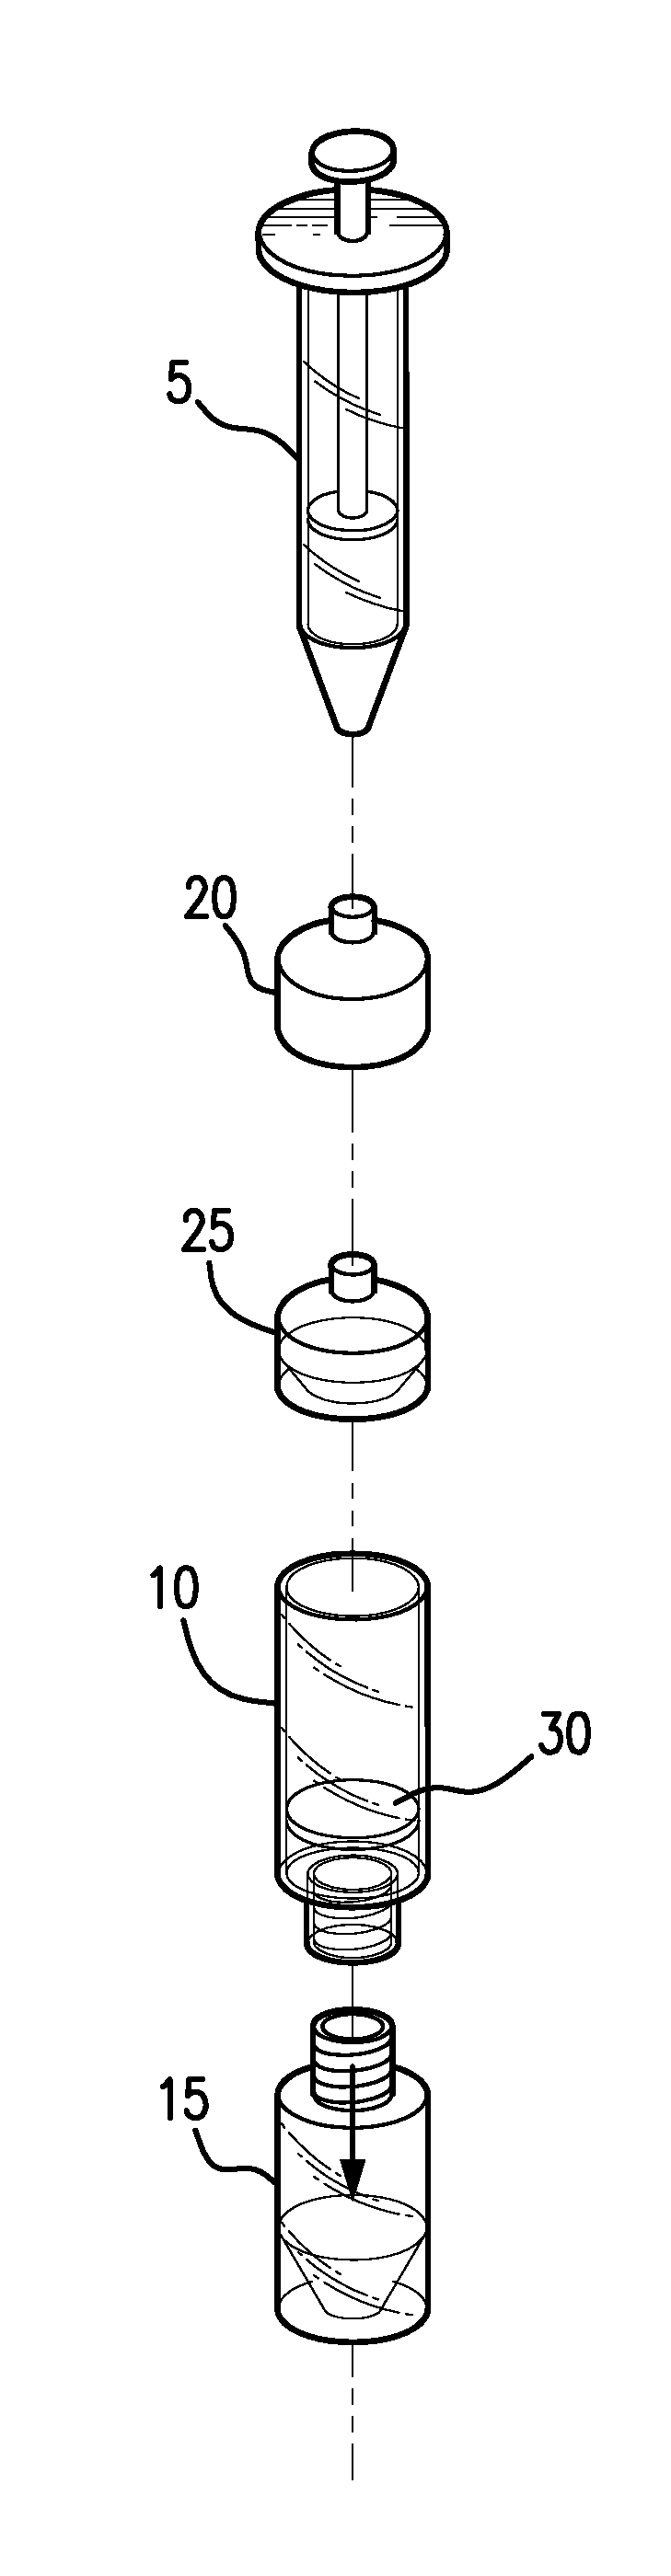 Disposable, rapid extraction apparatus and methods